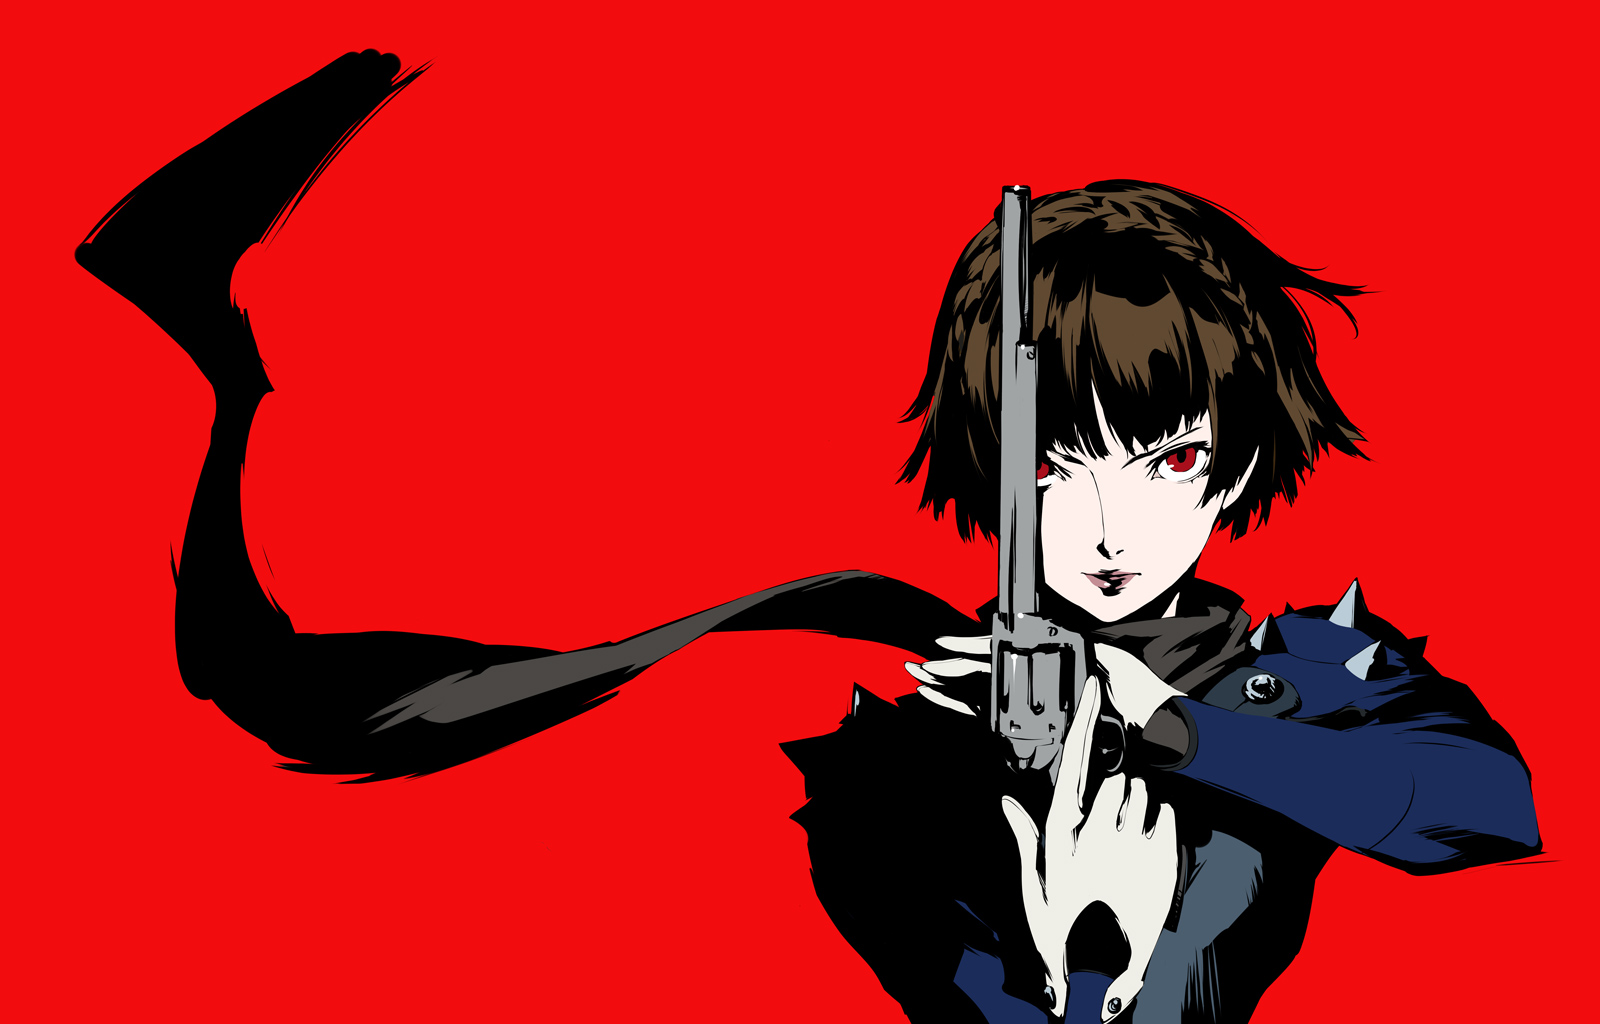 Fine Art: More Art From Persona 5 To Steal Your Heart